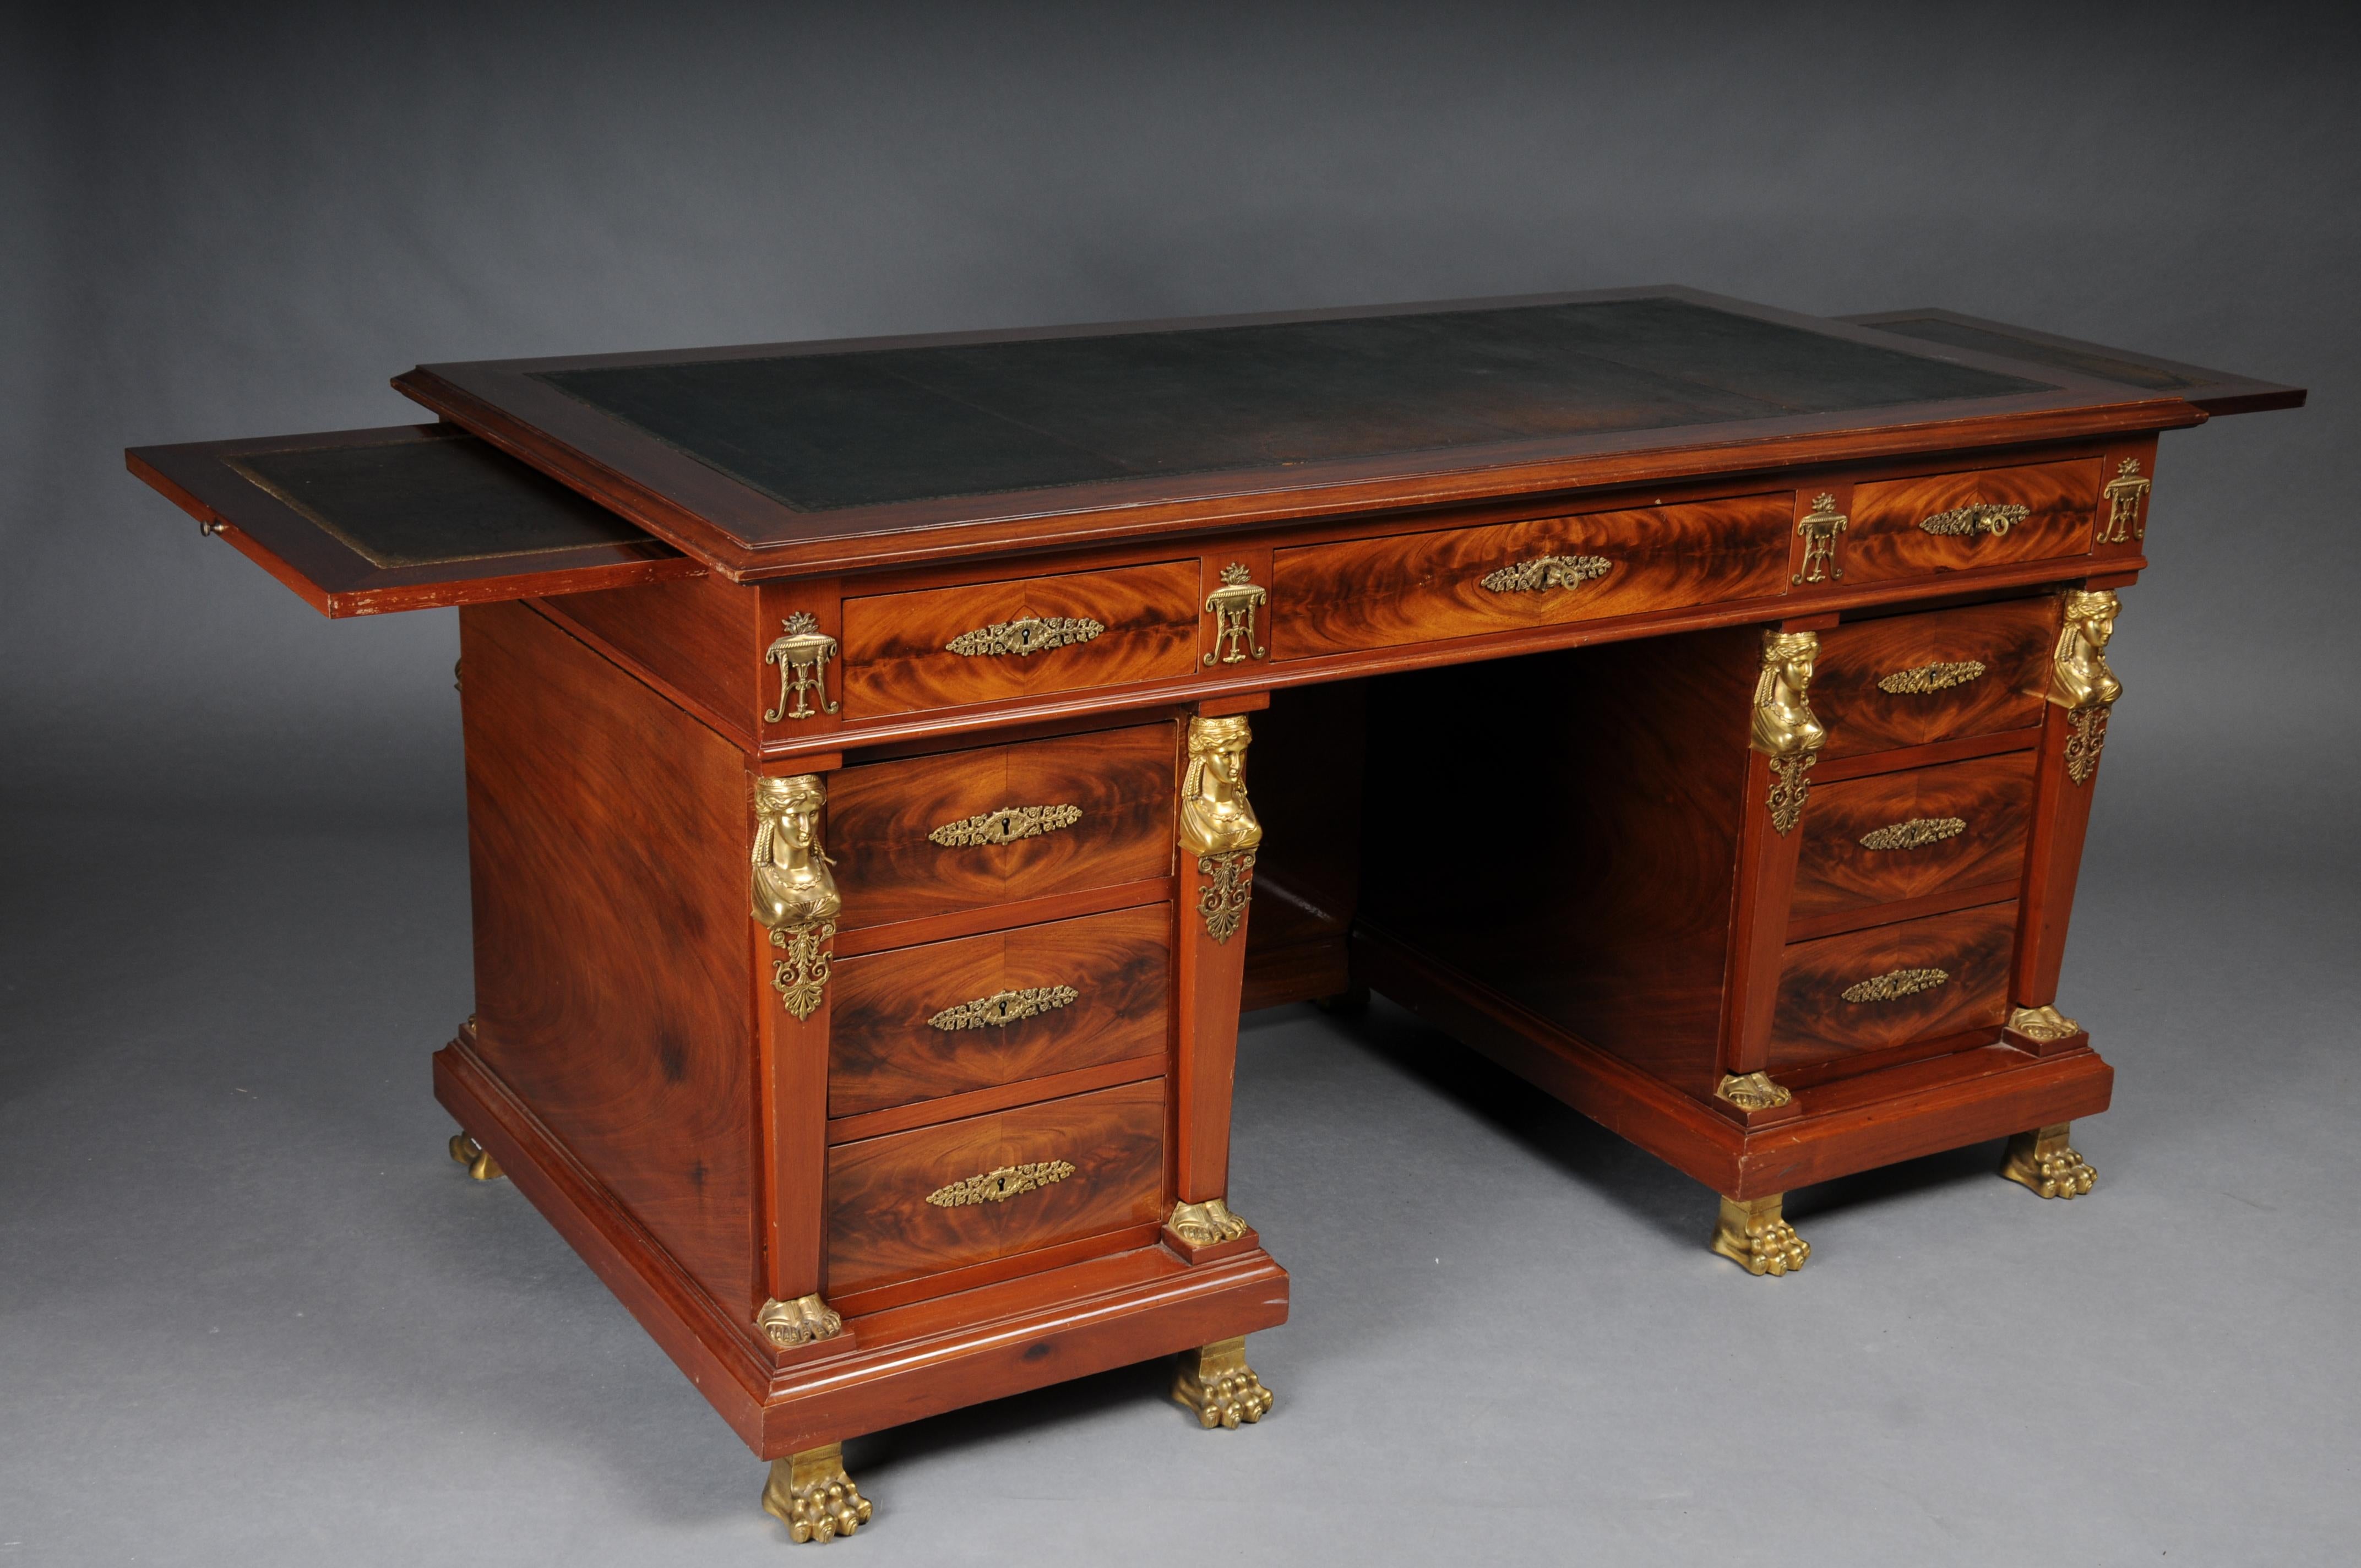 Royal Empire Desk/Bureau Plat, Gilt Bronze

Mahogany with gilded bronze fittings in the form of female figures, incense burners, acanthus decoration and garlands.
Rectangular plate with green leather inlay embossed with gold. Writing tablets that